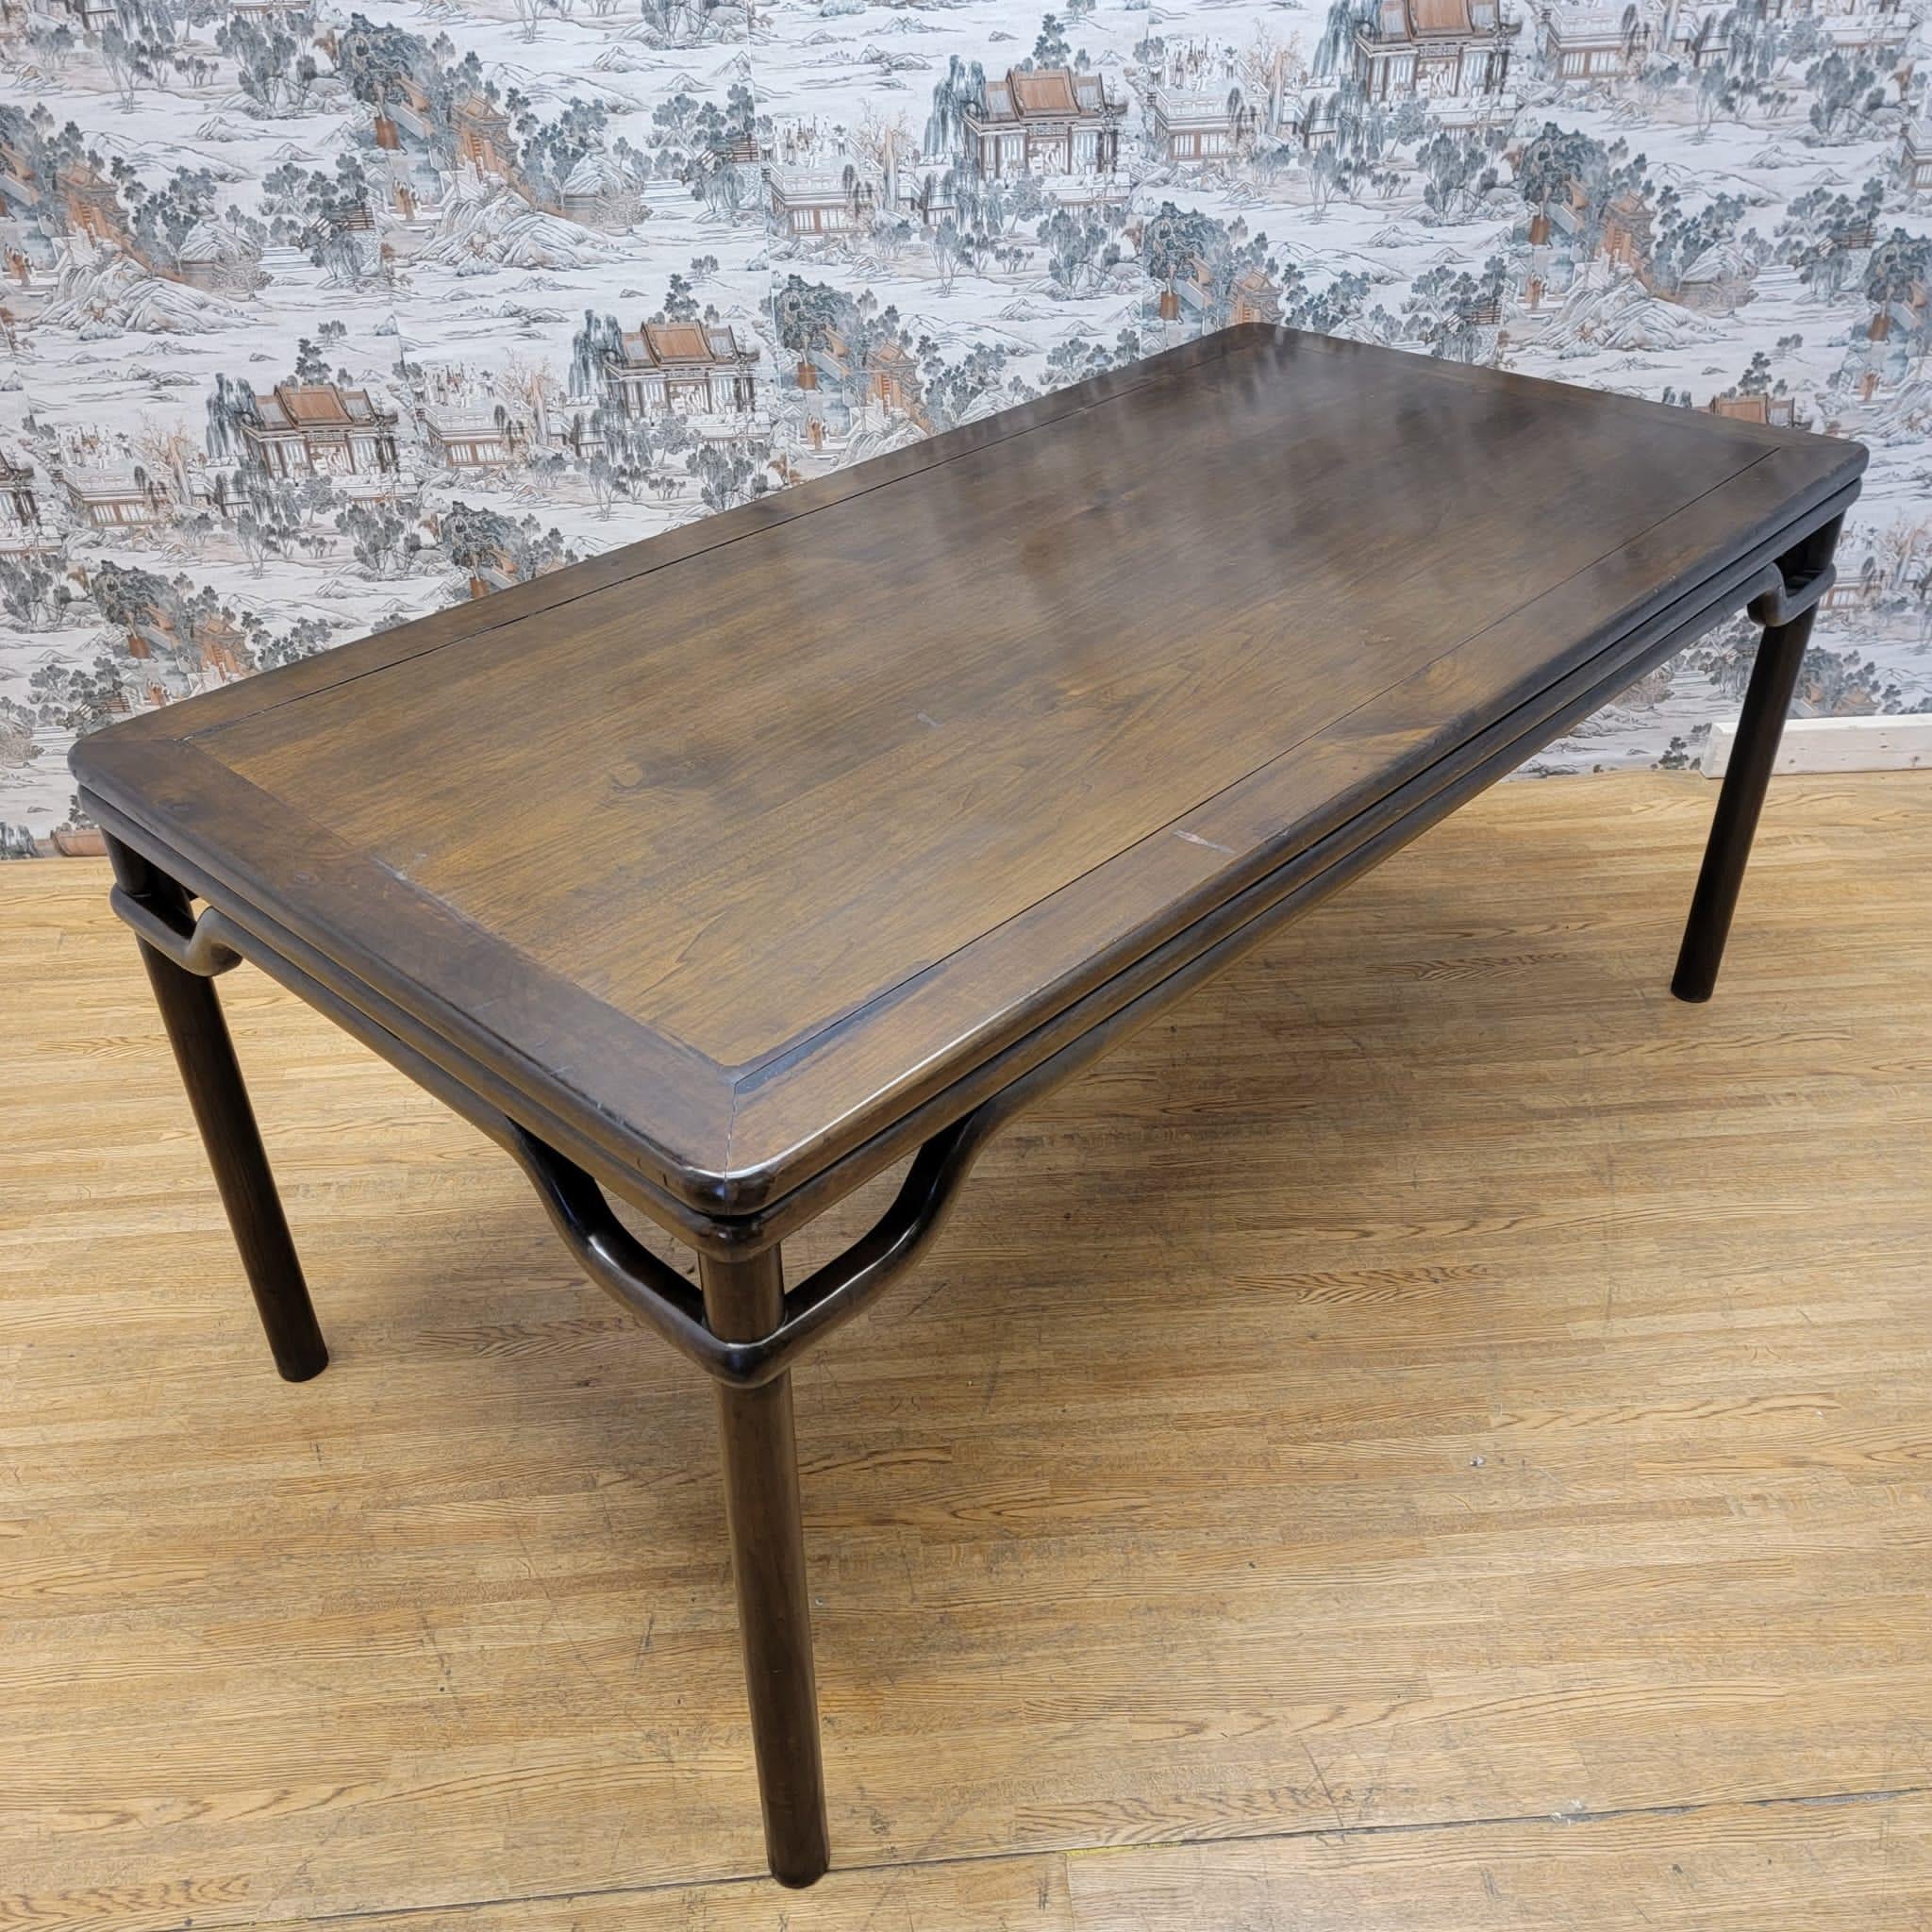 Antique Chinese Elm Humpback Stretcher Altar Table with Original Color and Patin For Sale 1